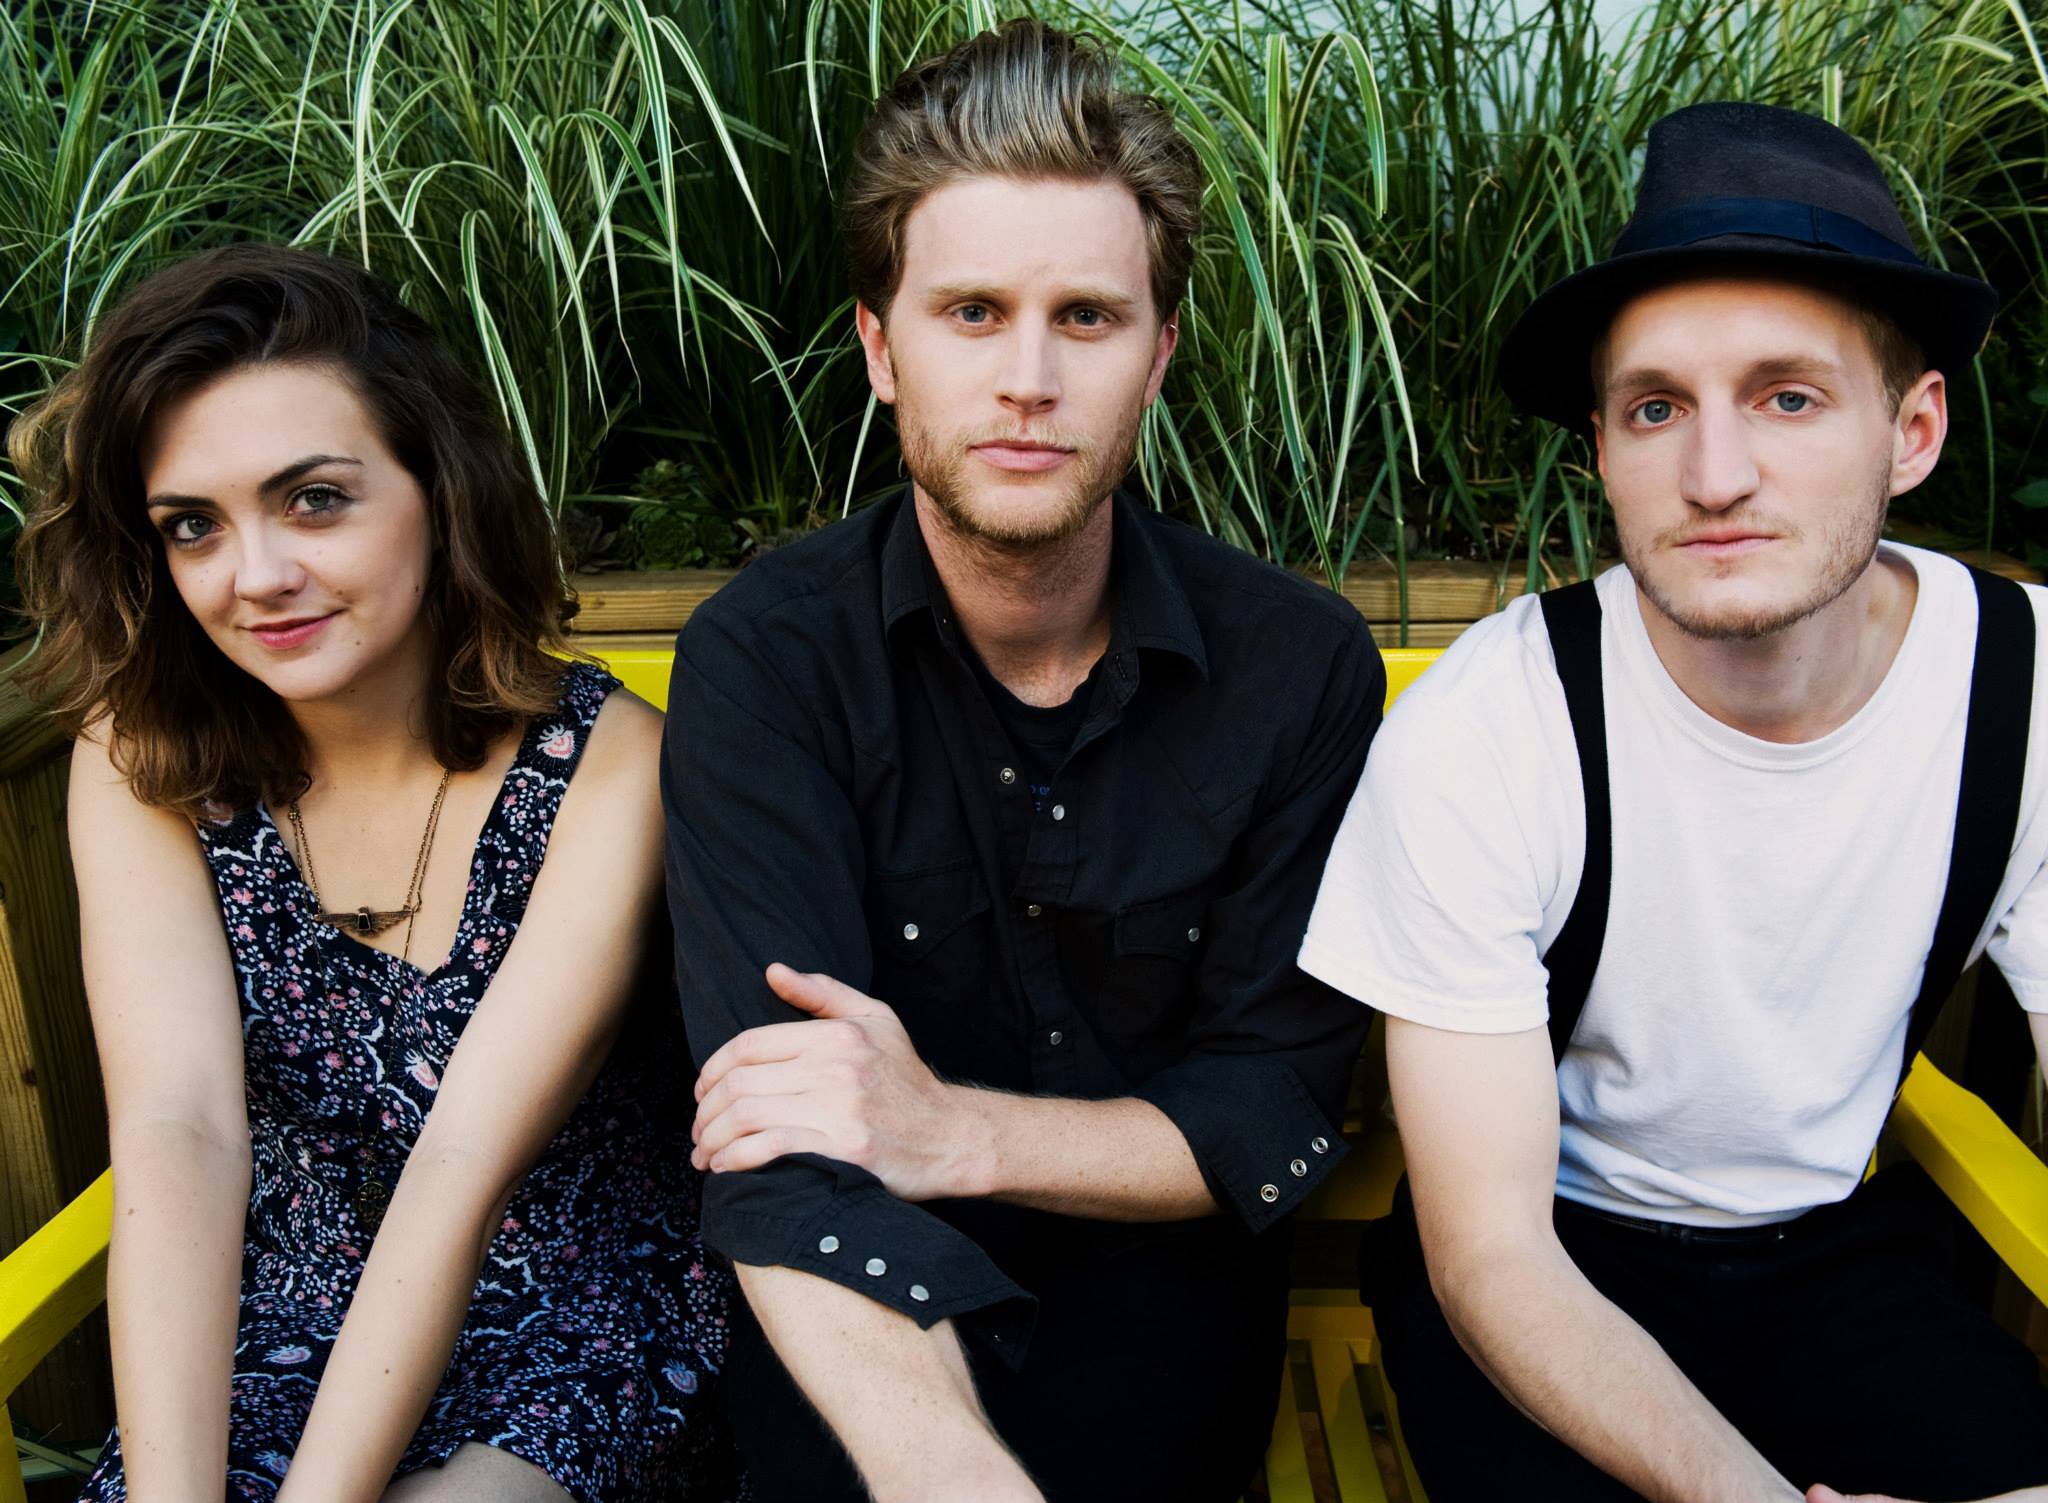 The Lumineers - iTunes Festival 2013 - LIVE - Roundhouse - London - Hack4Life